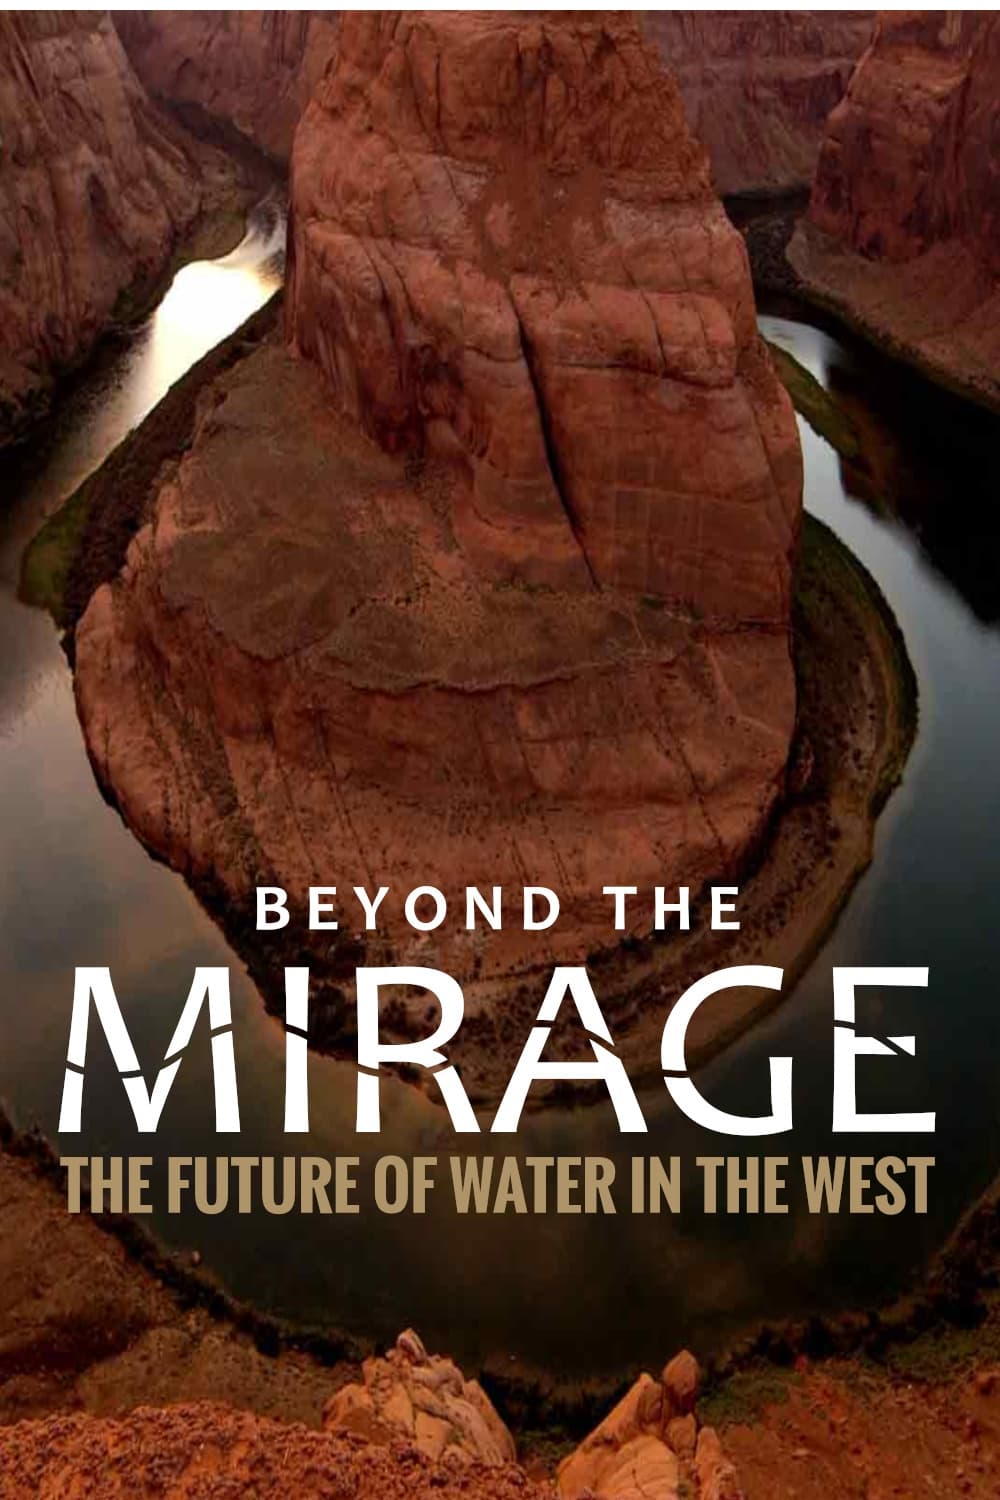 Beyond the Mirage: The Future of Water in the West